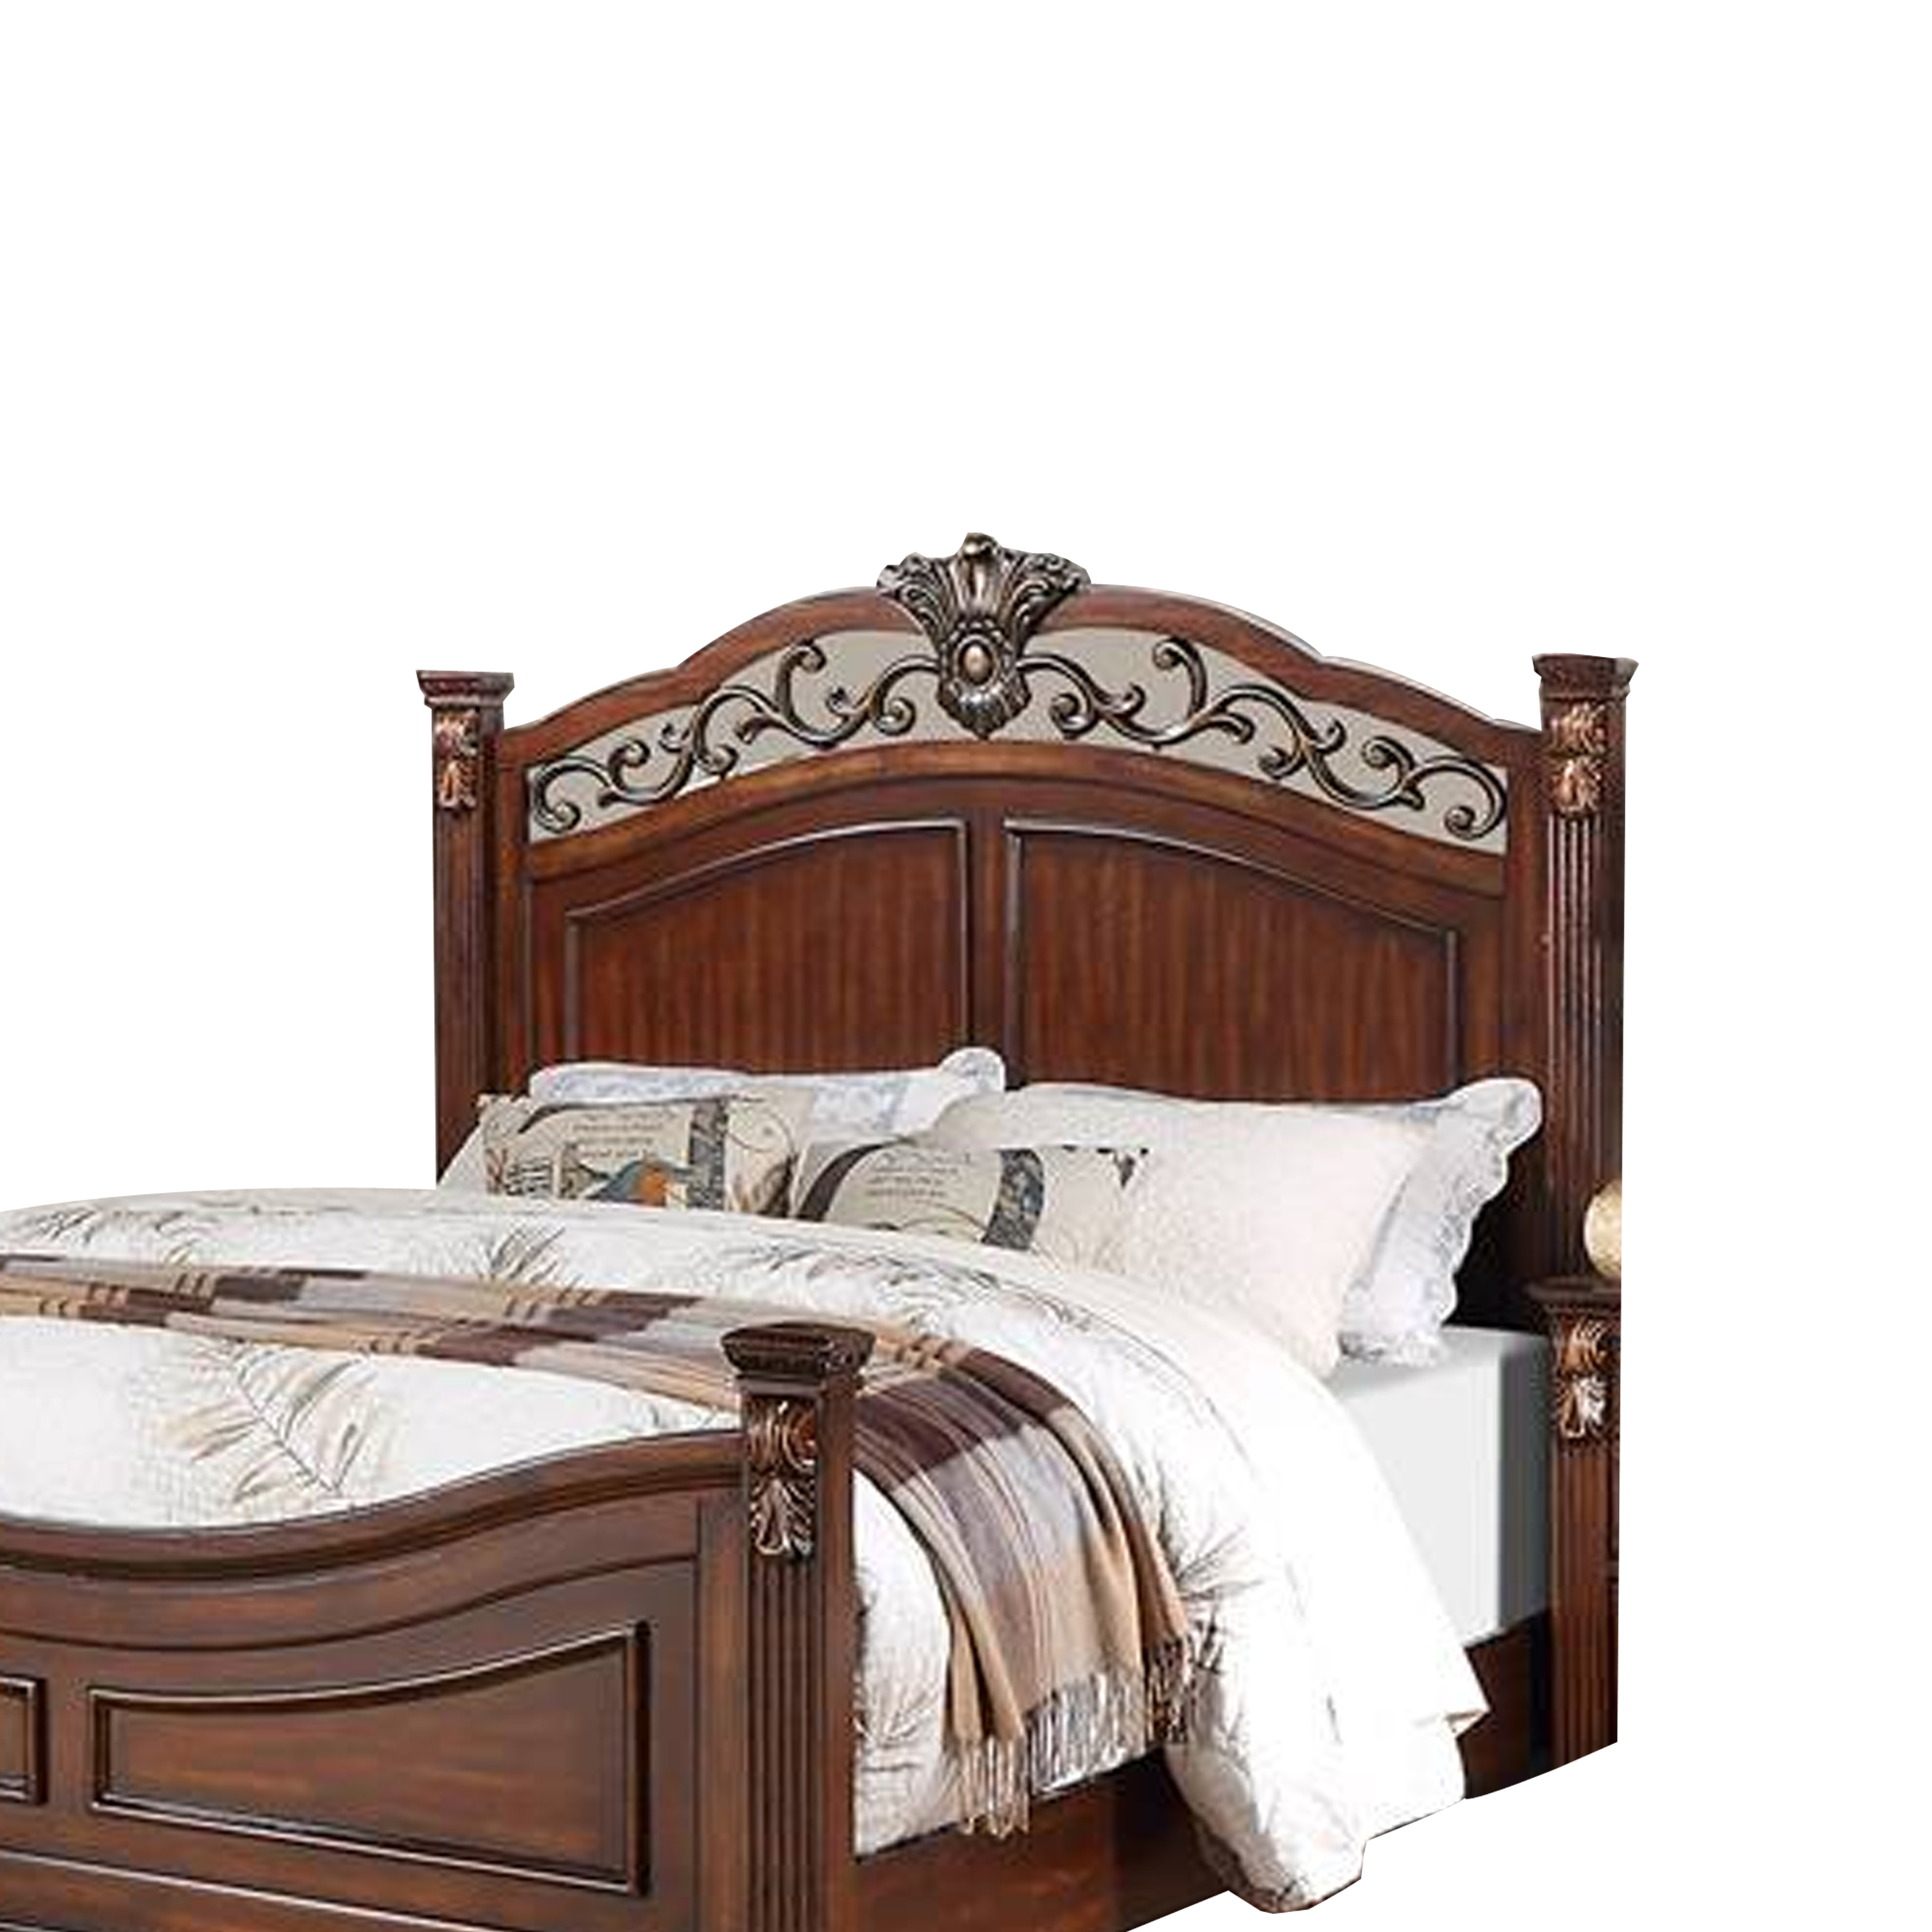 Aza Traditional Wood Queen Size Bed, Leaf Carvings, Rich Cherry Brown - Saltoro Sherpi